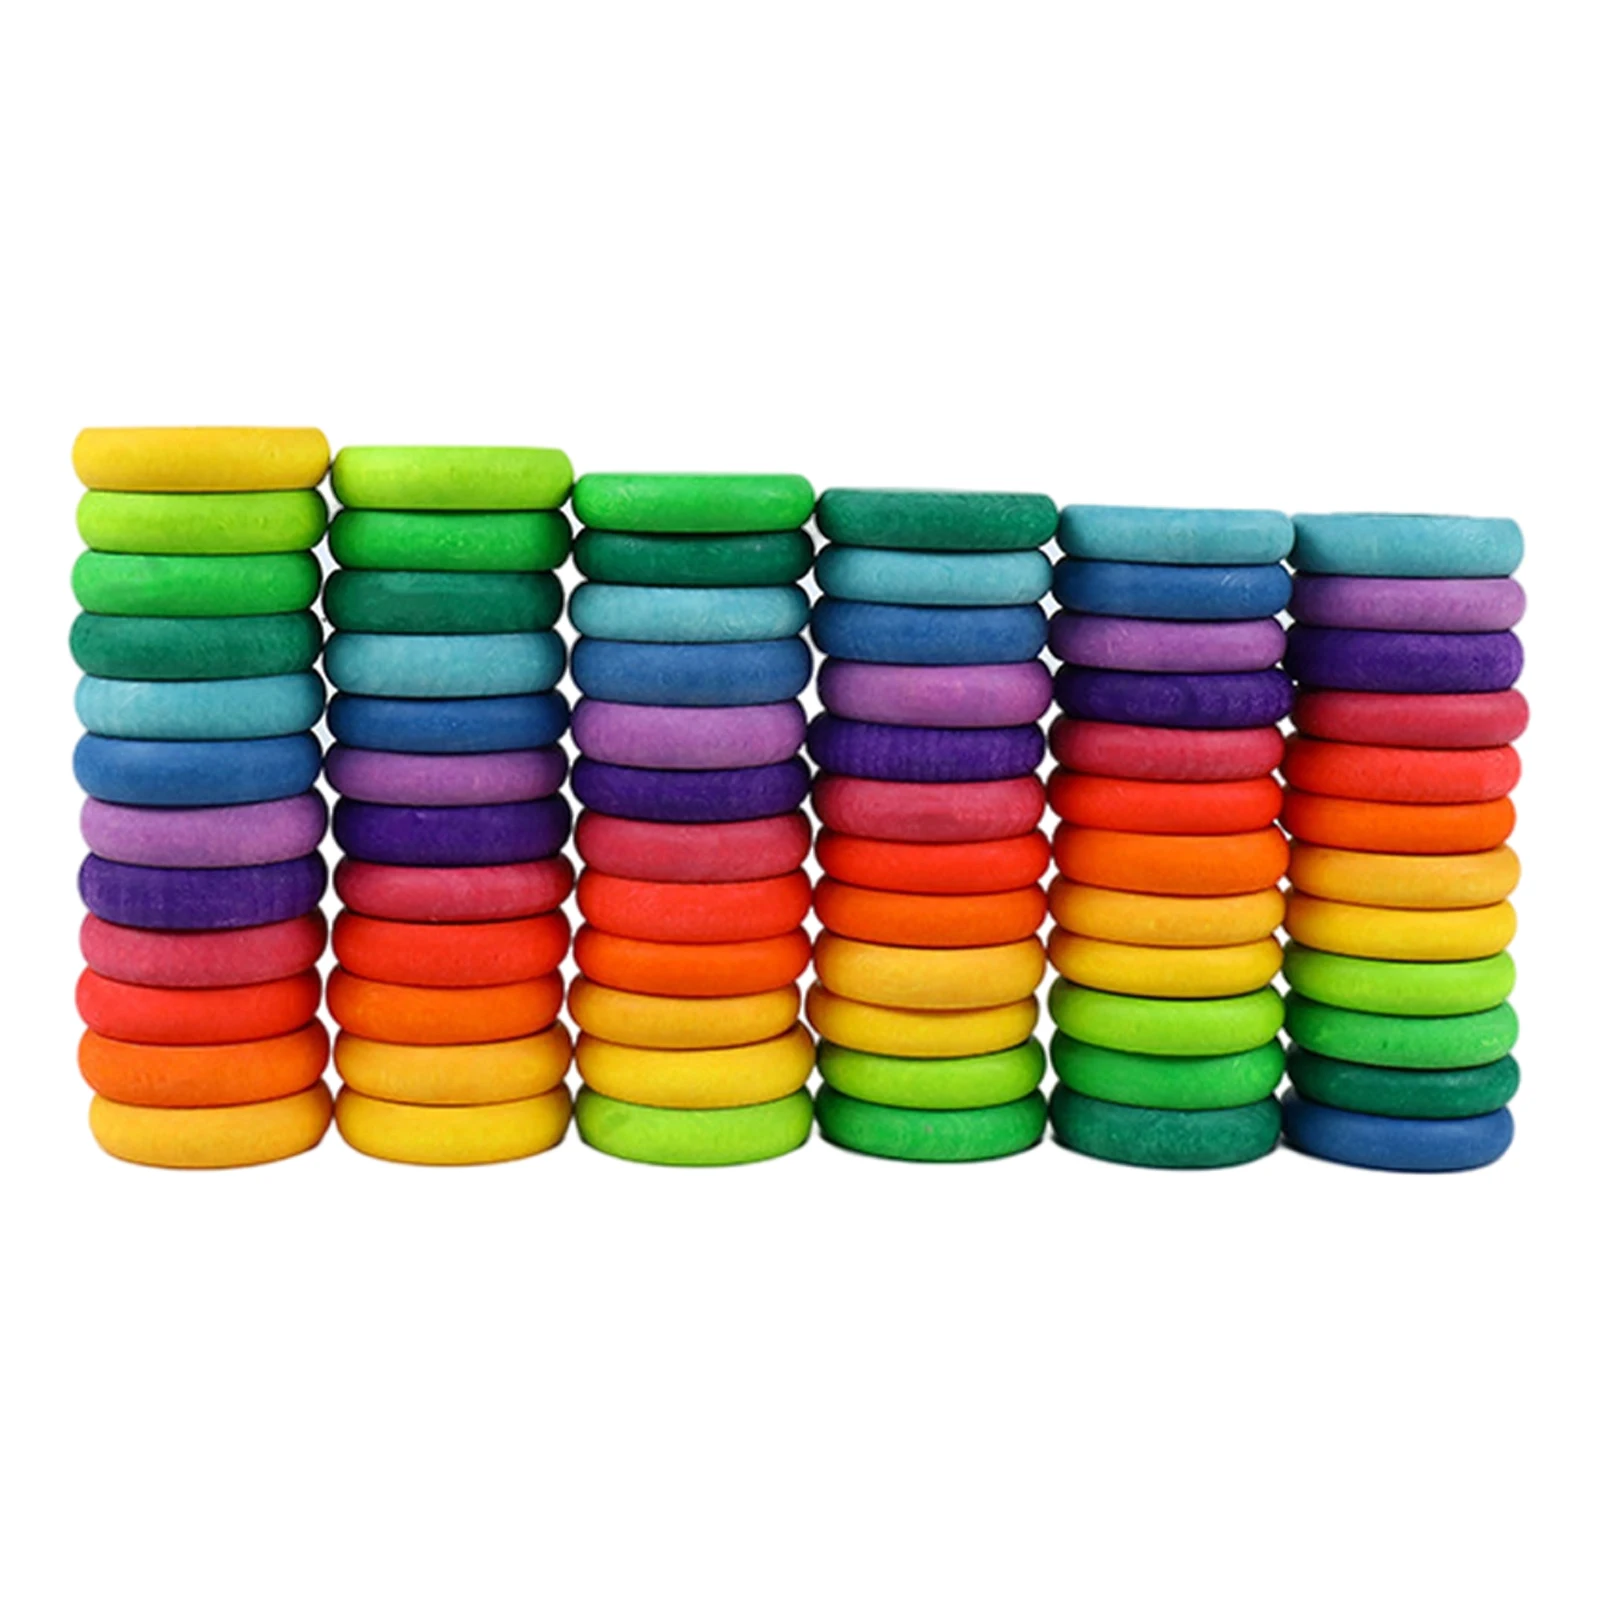 72/Set Multicolor Wood Round Block Donut Pie Shape Block Stacking Counting Stacker Puzzle Baby Creative Building Toy Home Decor